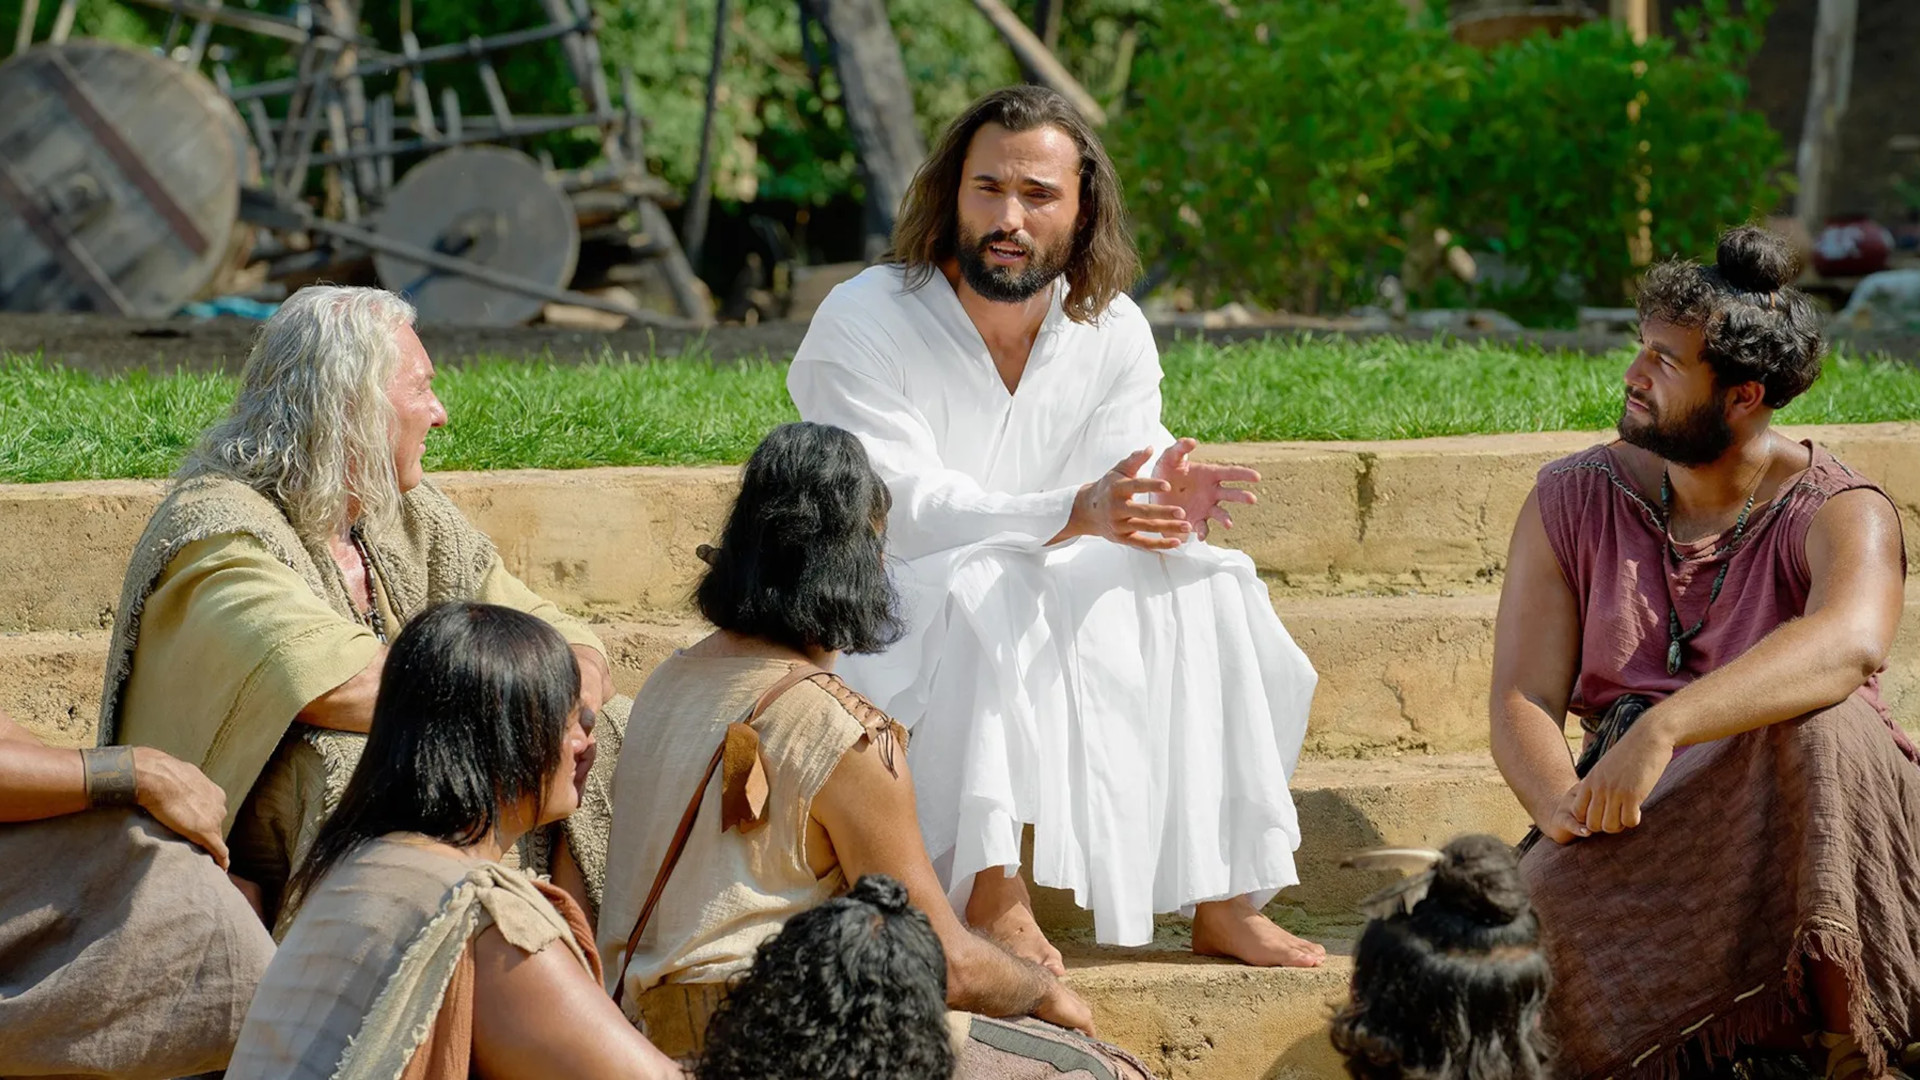 Christ speaks to his disciples in this still from the Book of Mormon Videos of The Church of Jesus Christ of Latter-day Saints.